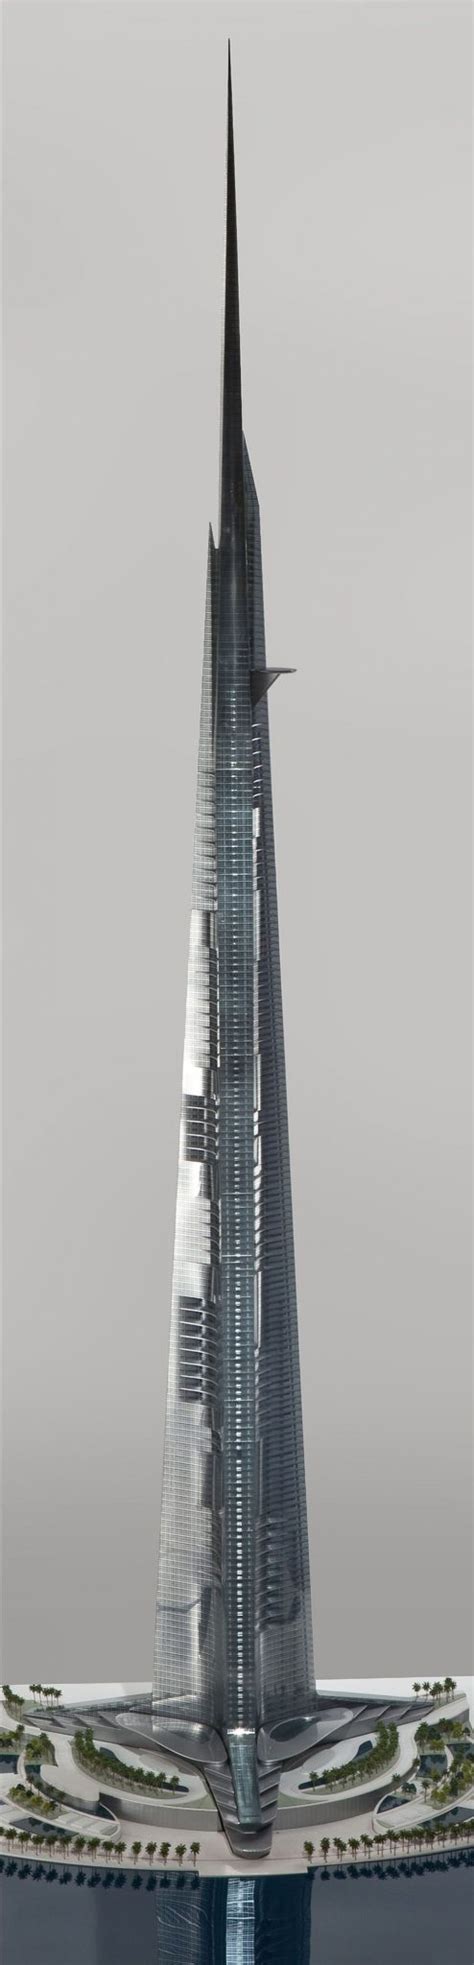 Jeddah Tower The Worlds Tallest Skyscraper Is On Hold